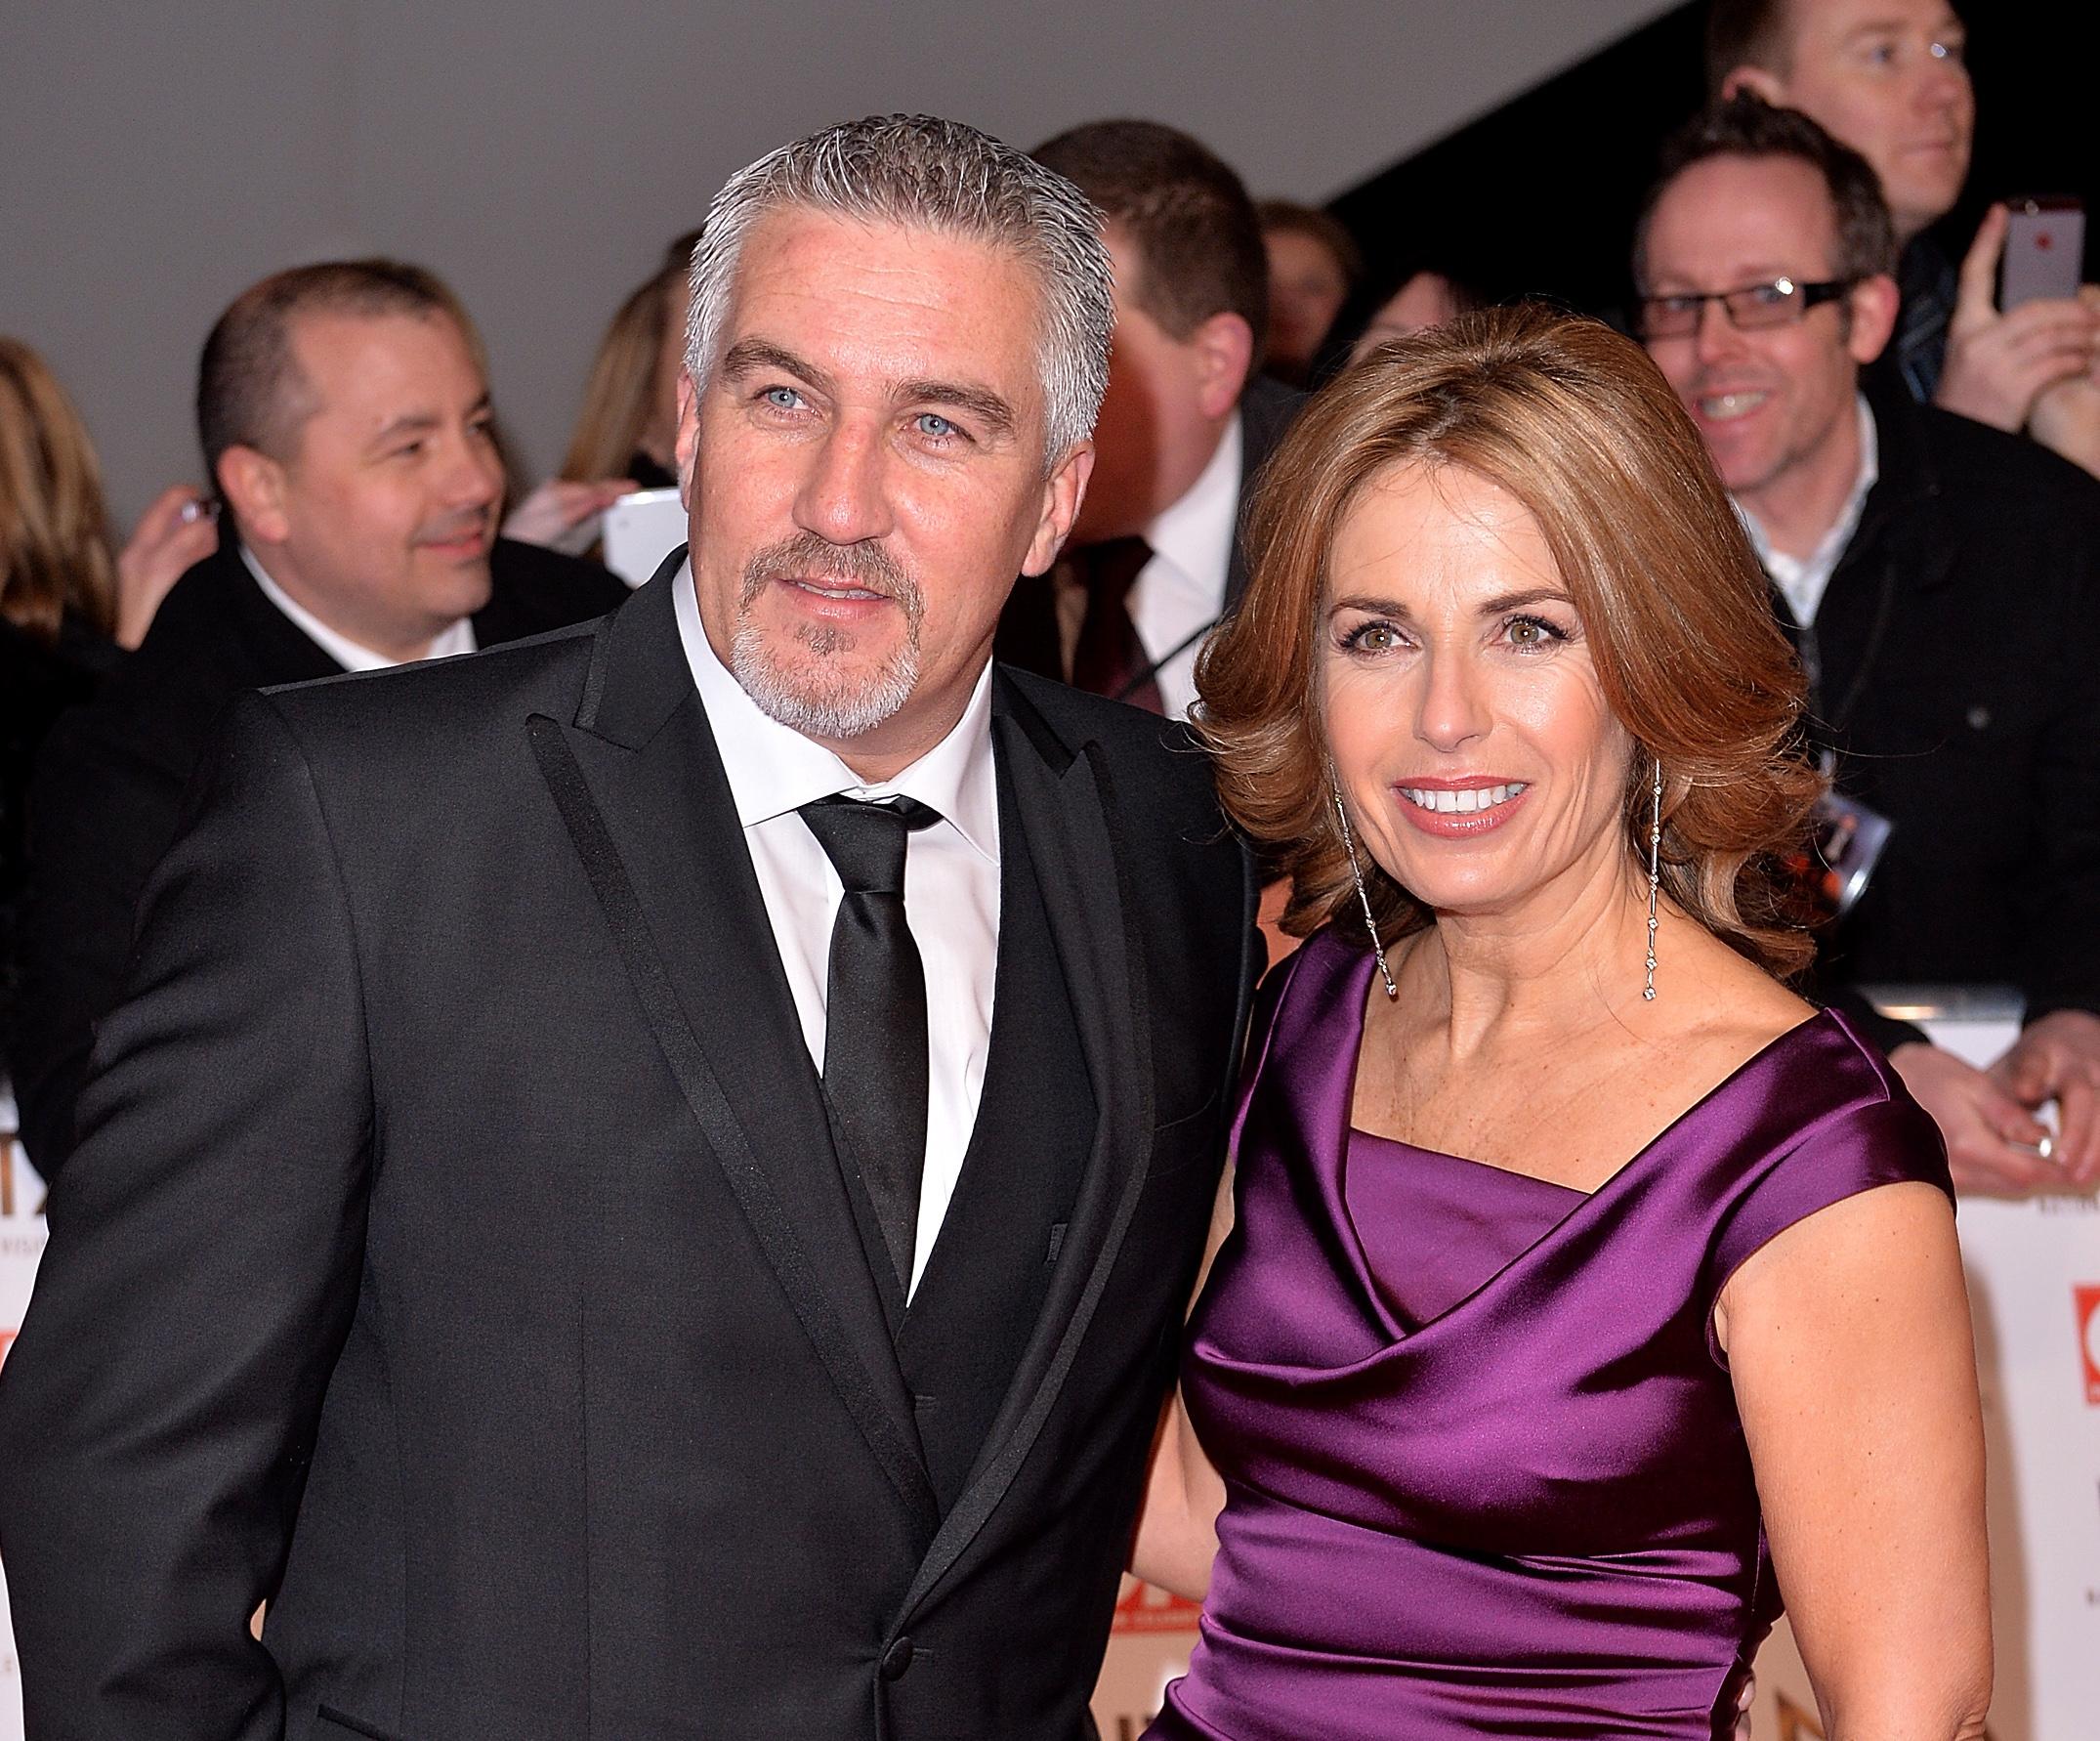 Paul Hollywood and his ex-wife Alexander